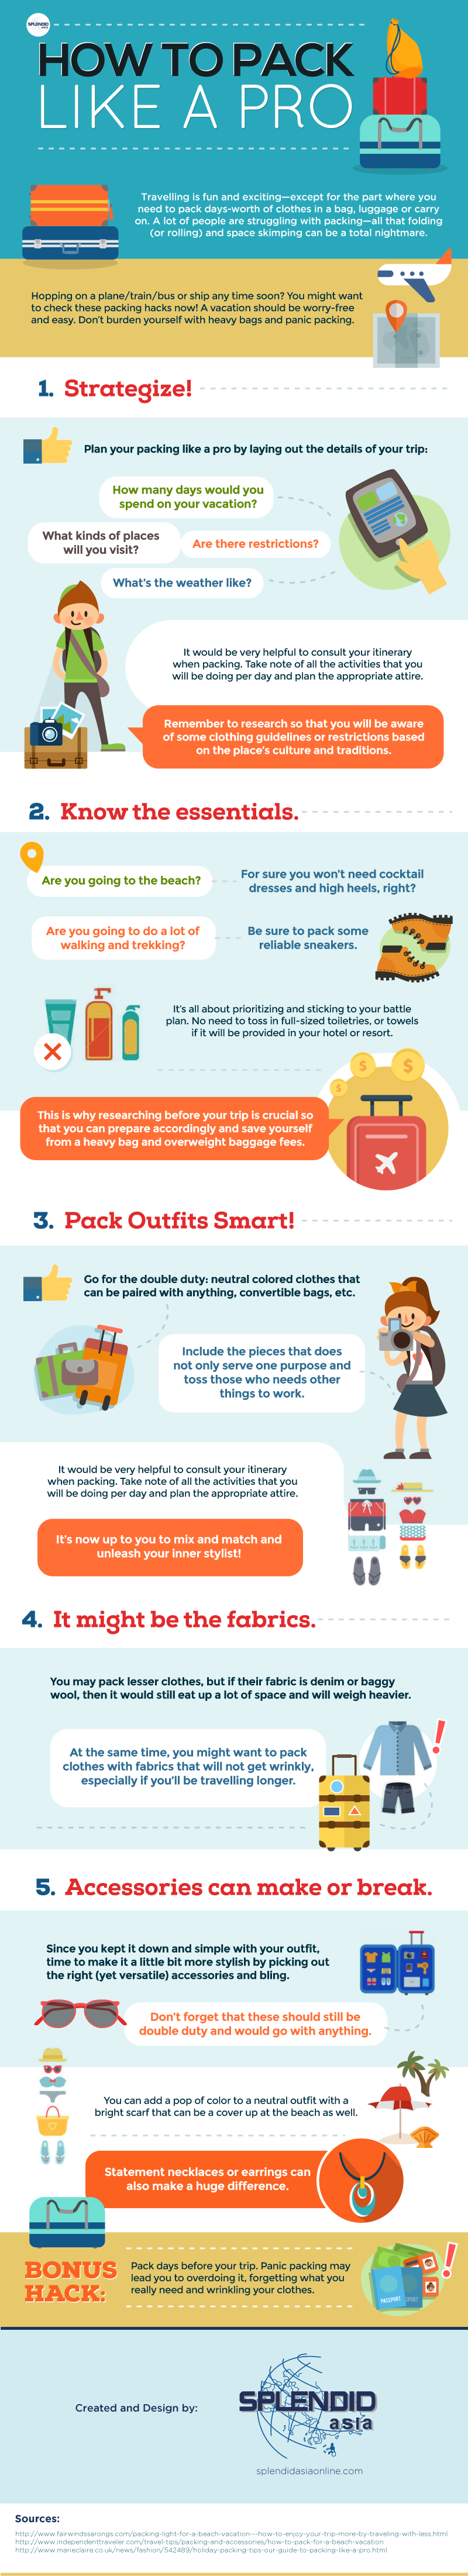 How To Pack like a Pro